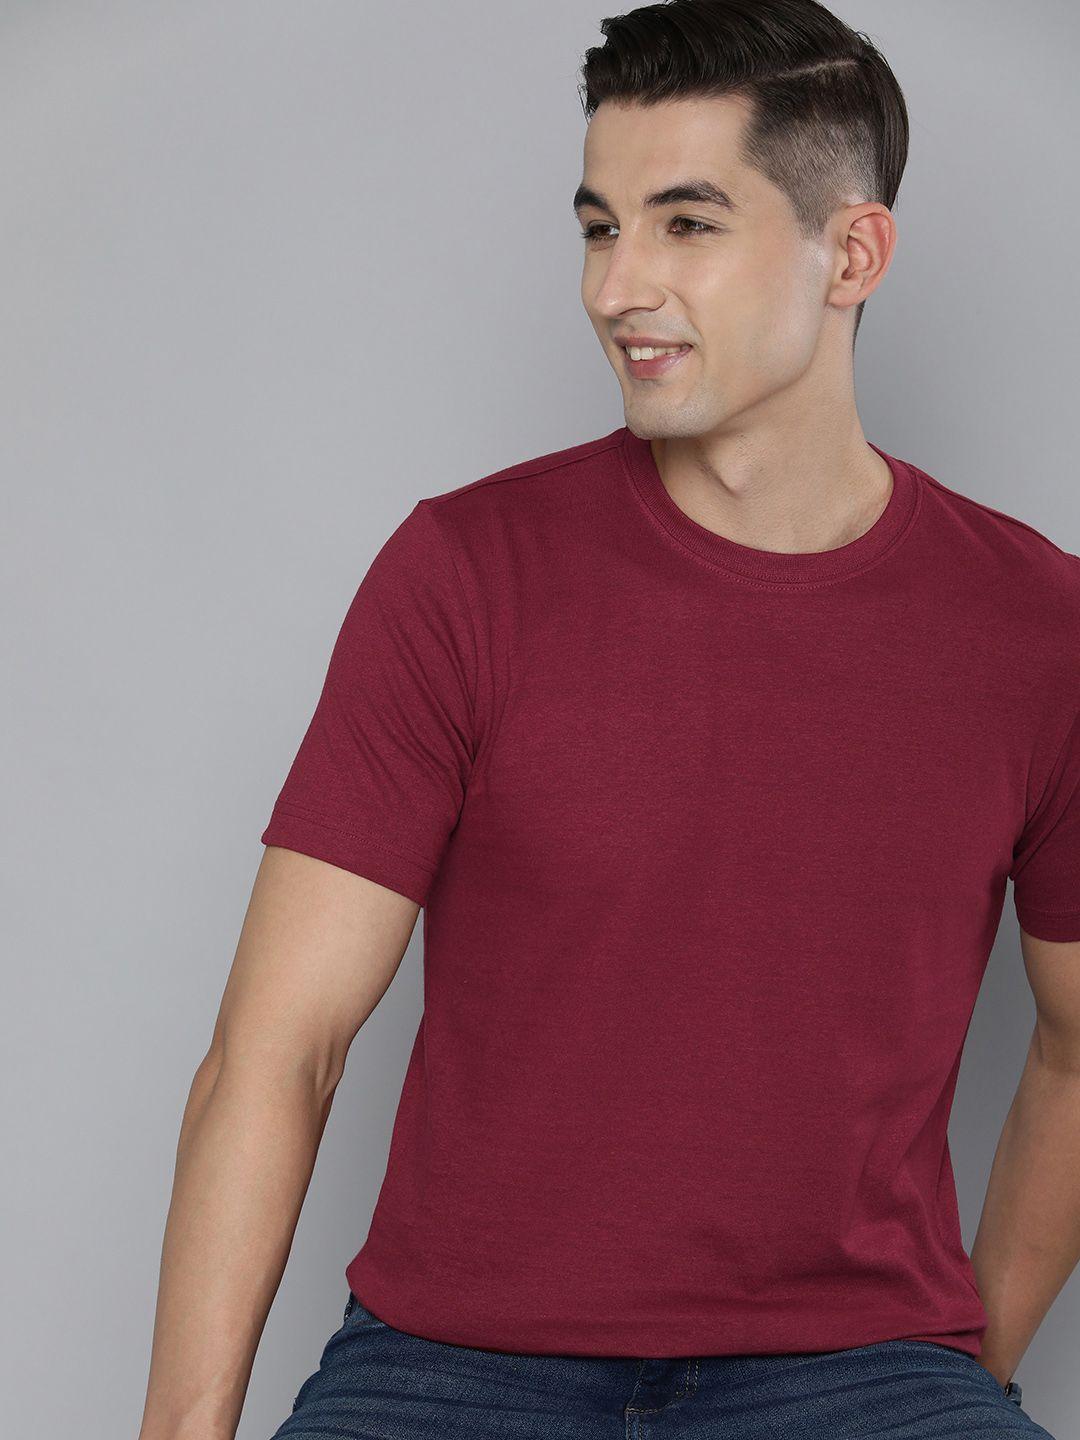 here&now men burgundy cotton sustainable t-shirt